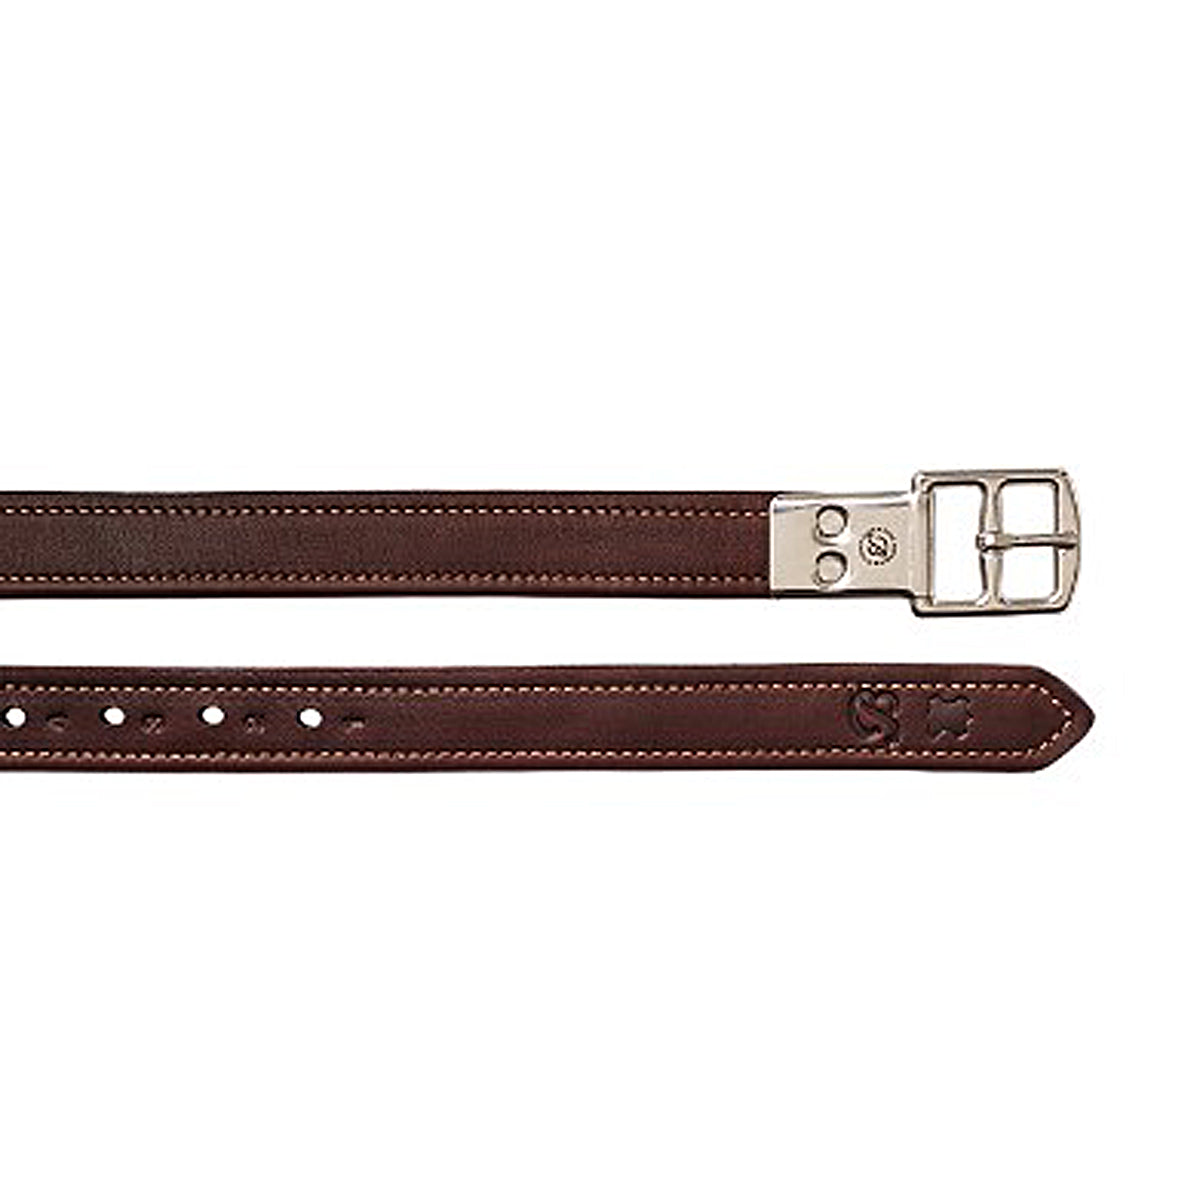 Bates Stirrup Leathers in Luxe Leather